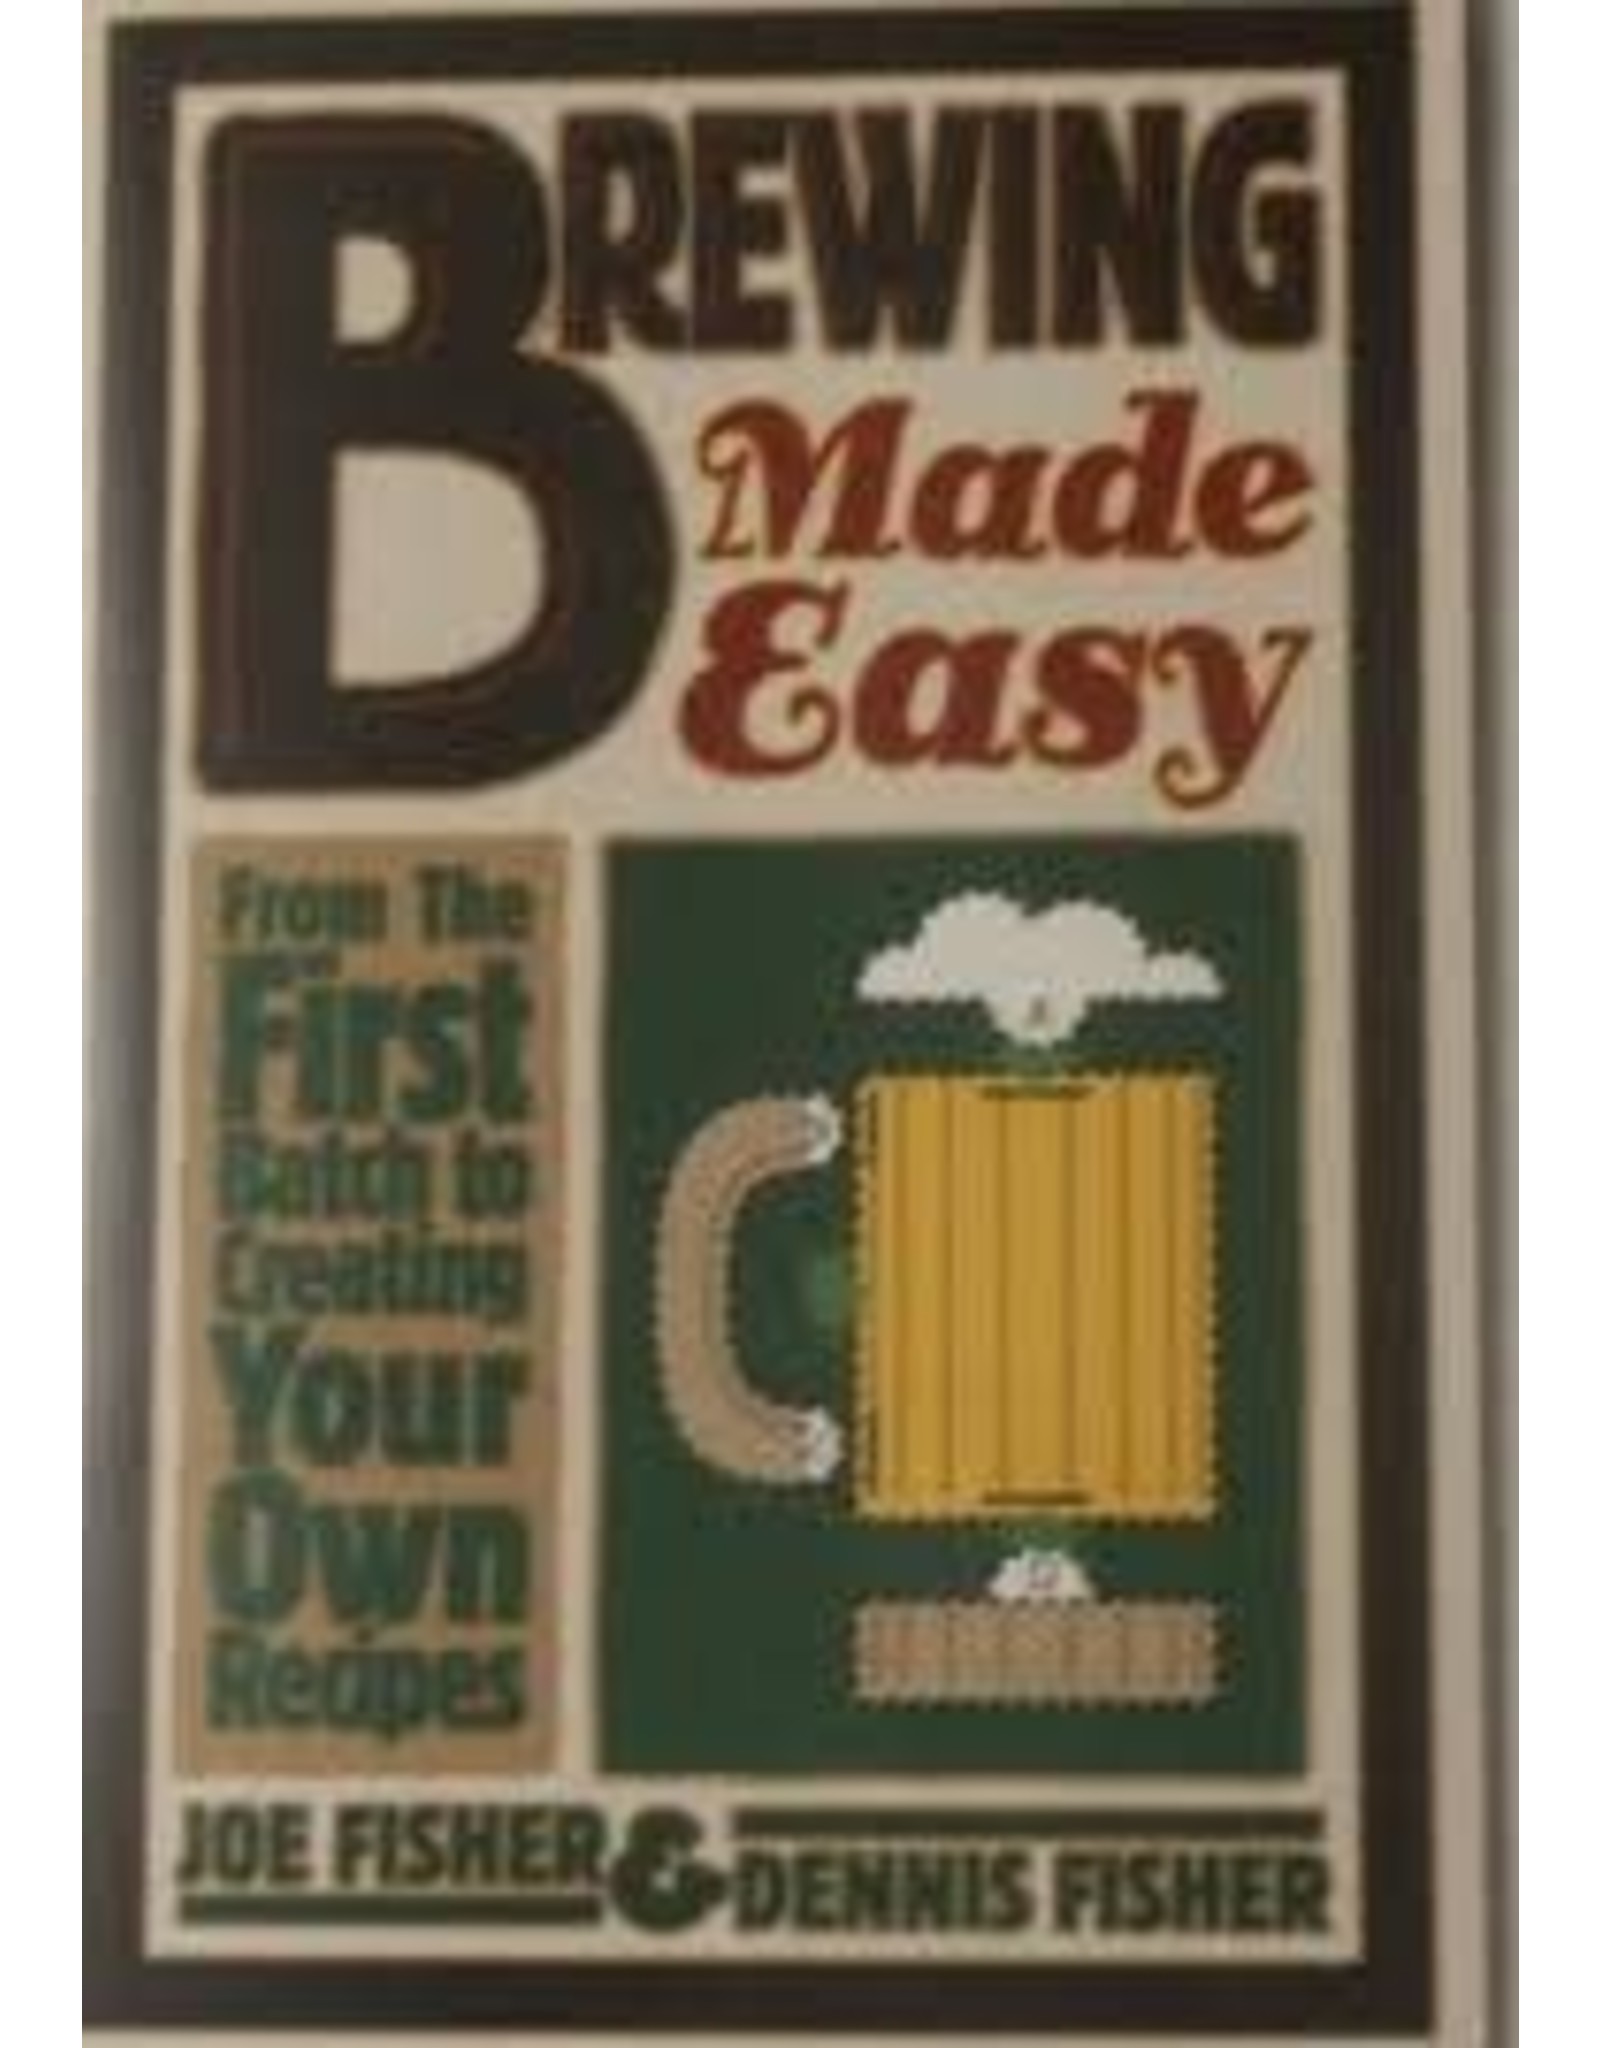 BREWING MADE EASY